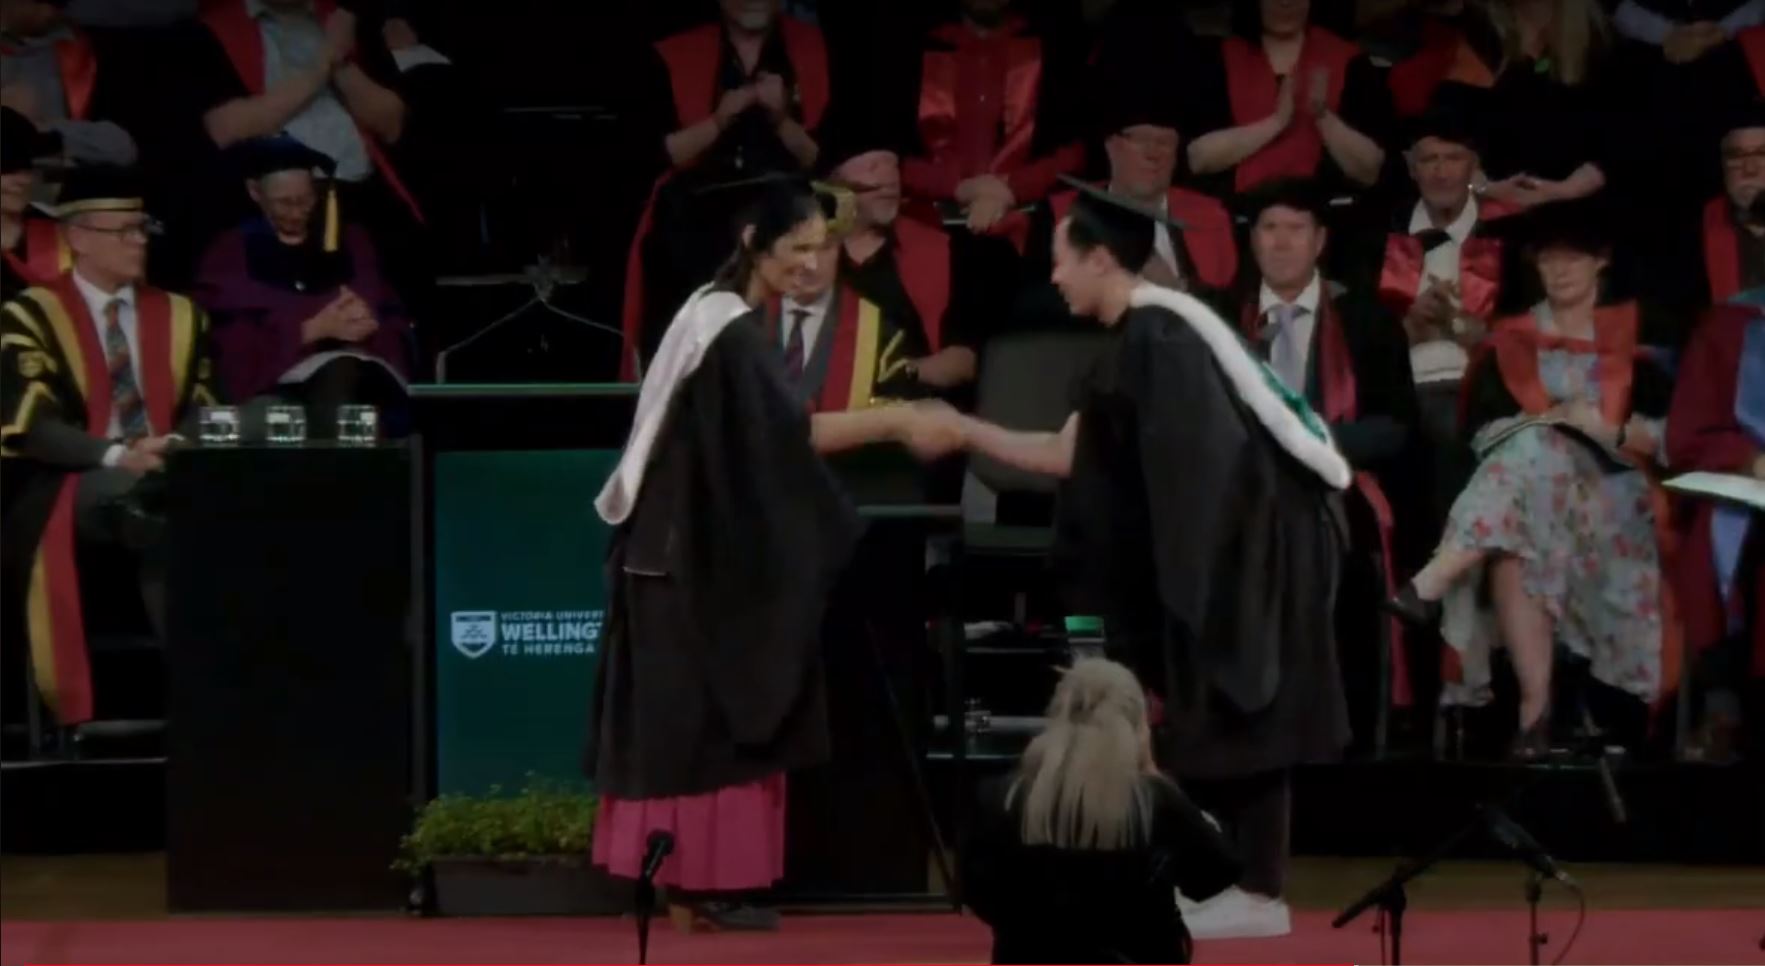 A graduate receiving their degree, with Nic Smith watching on the left.